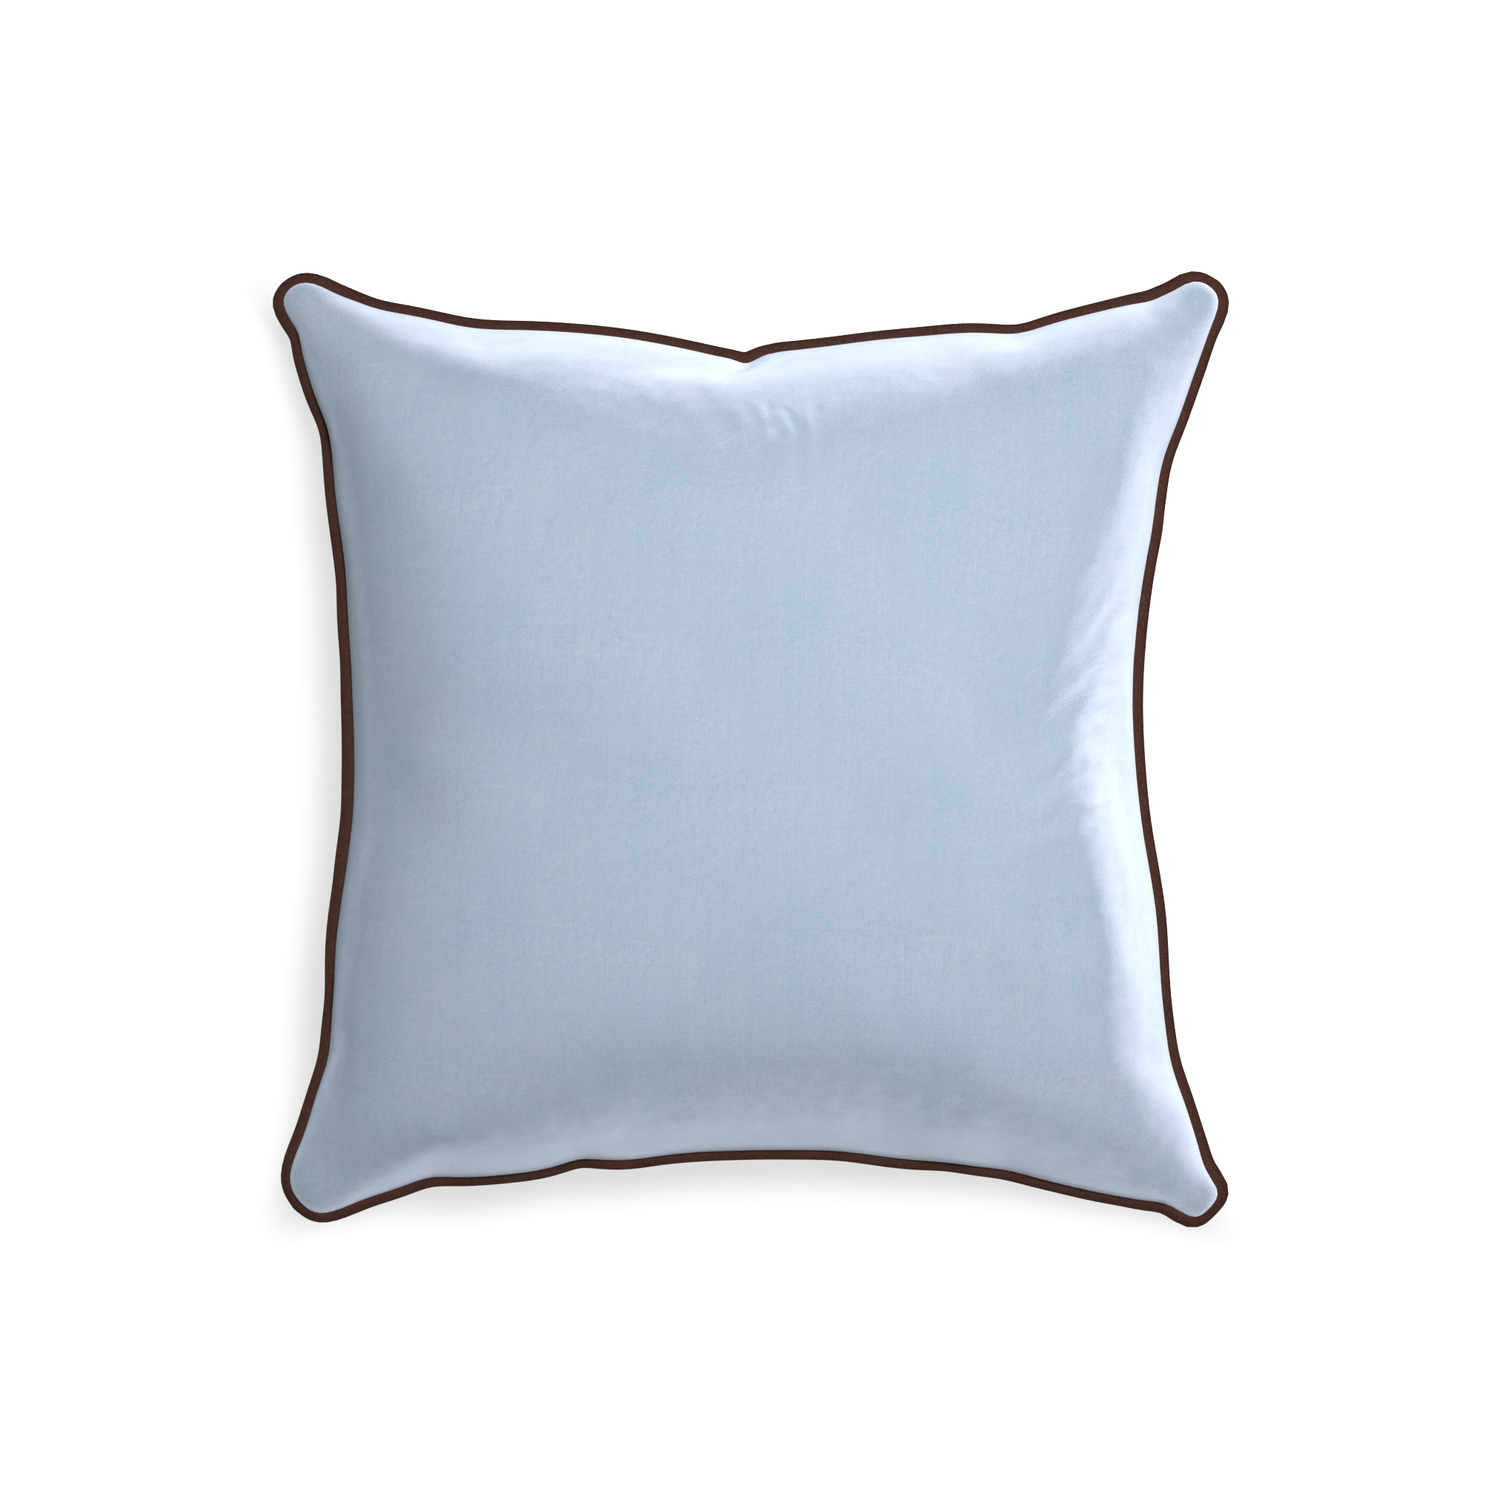 20-square sky velvet custom pillow with w piping on white background